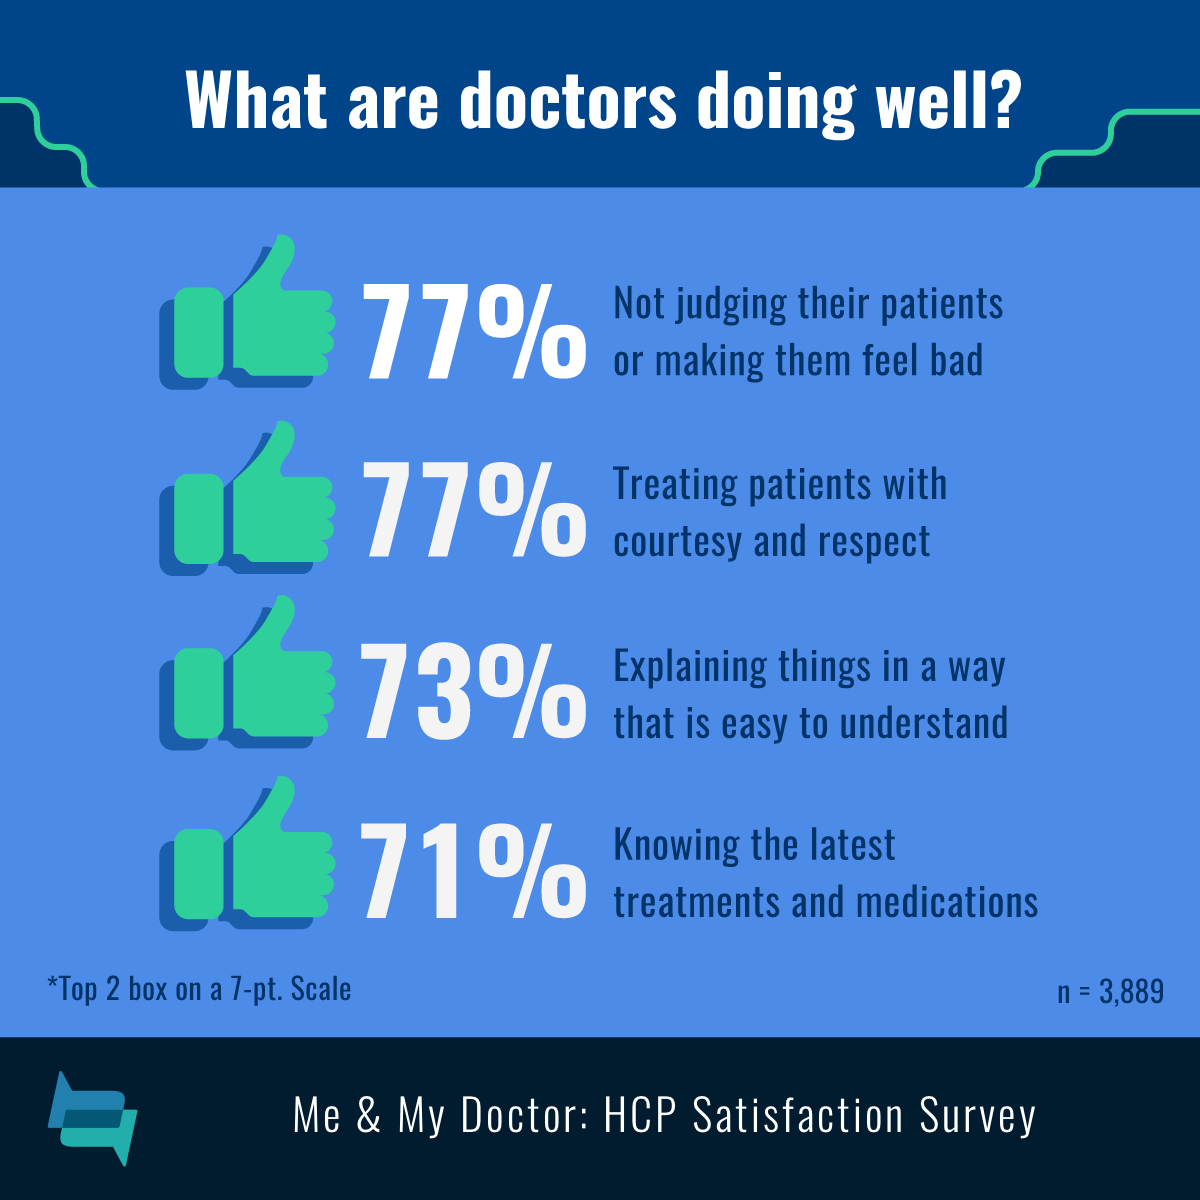 64% feel their doctors are thorough and 46% of participants feel their doctor spends adequate time with them.